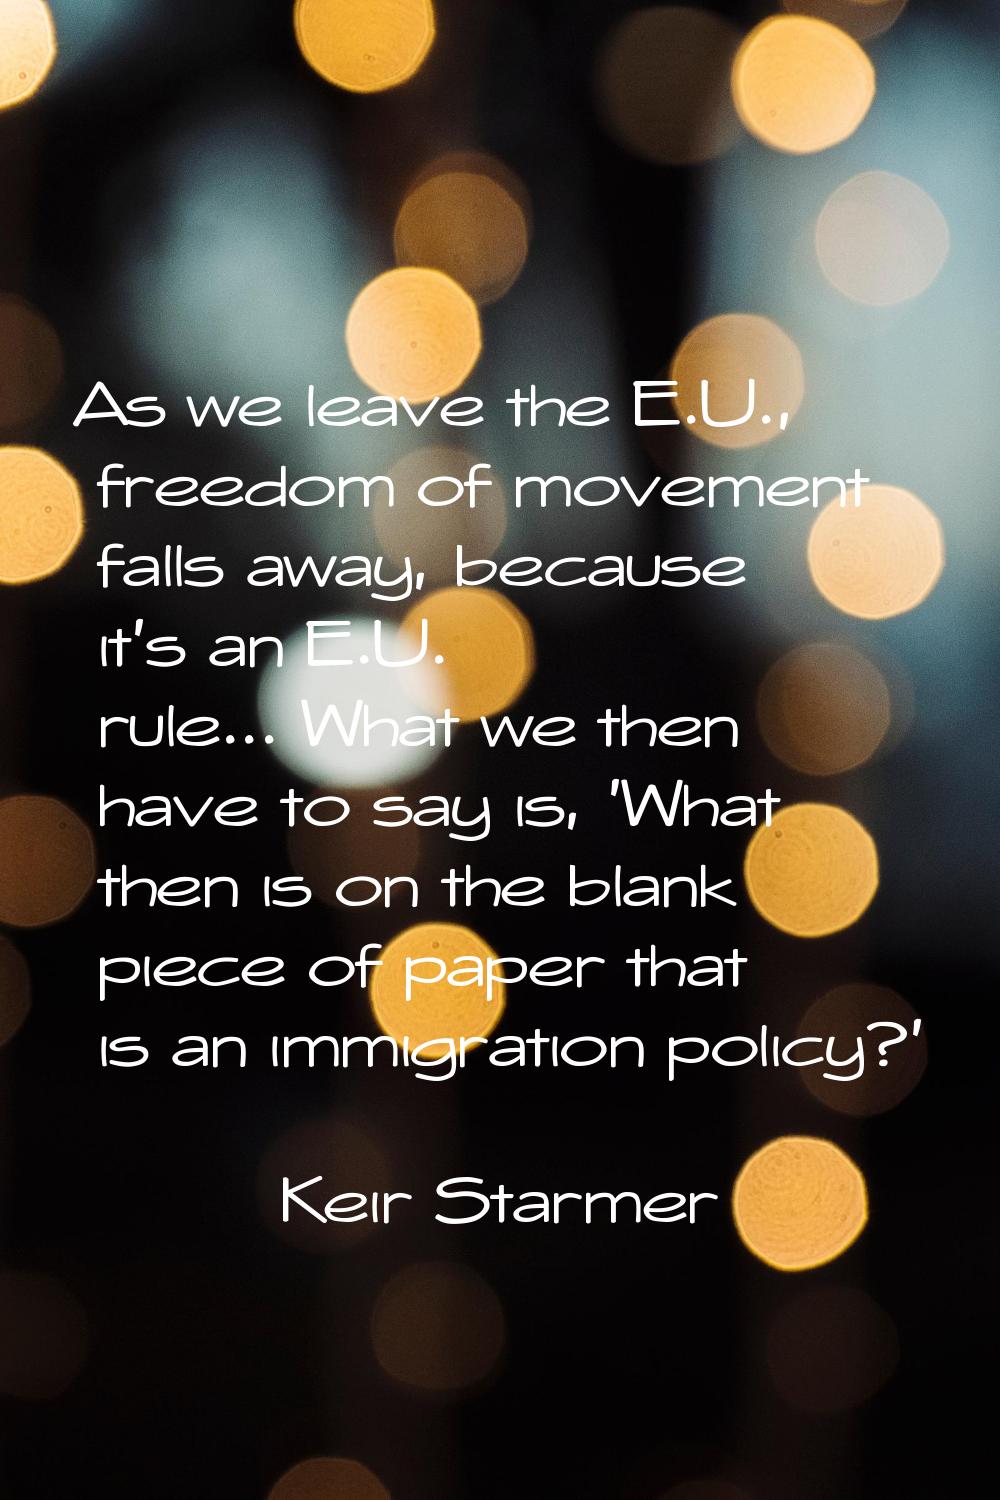 As we leave the E.U., freedom of movement falls away, because it's an E.U. rule... What we then hav